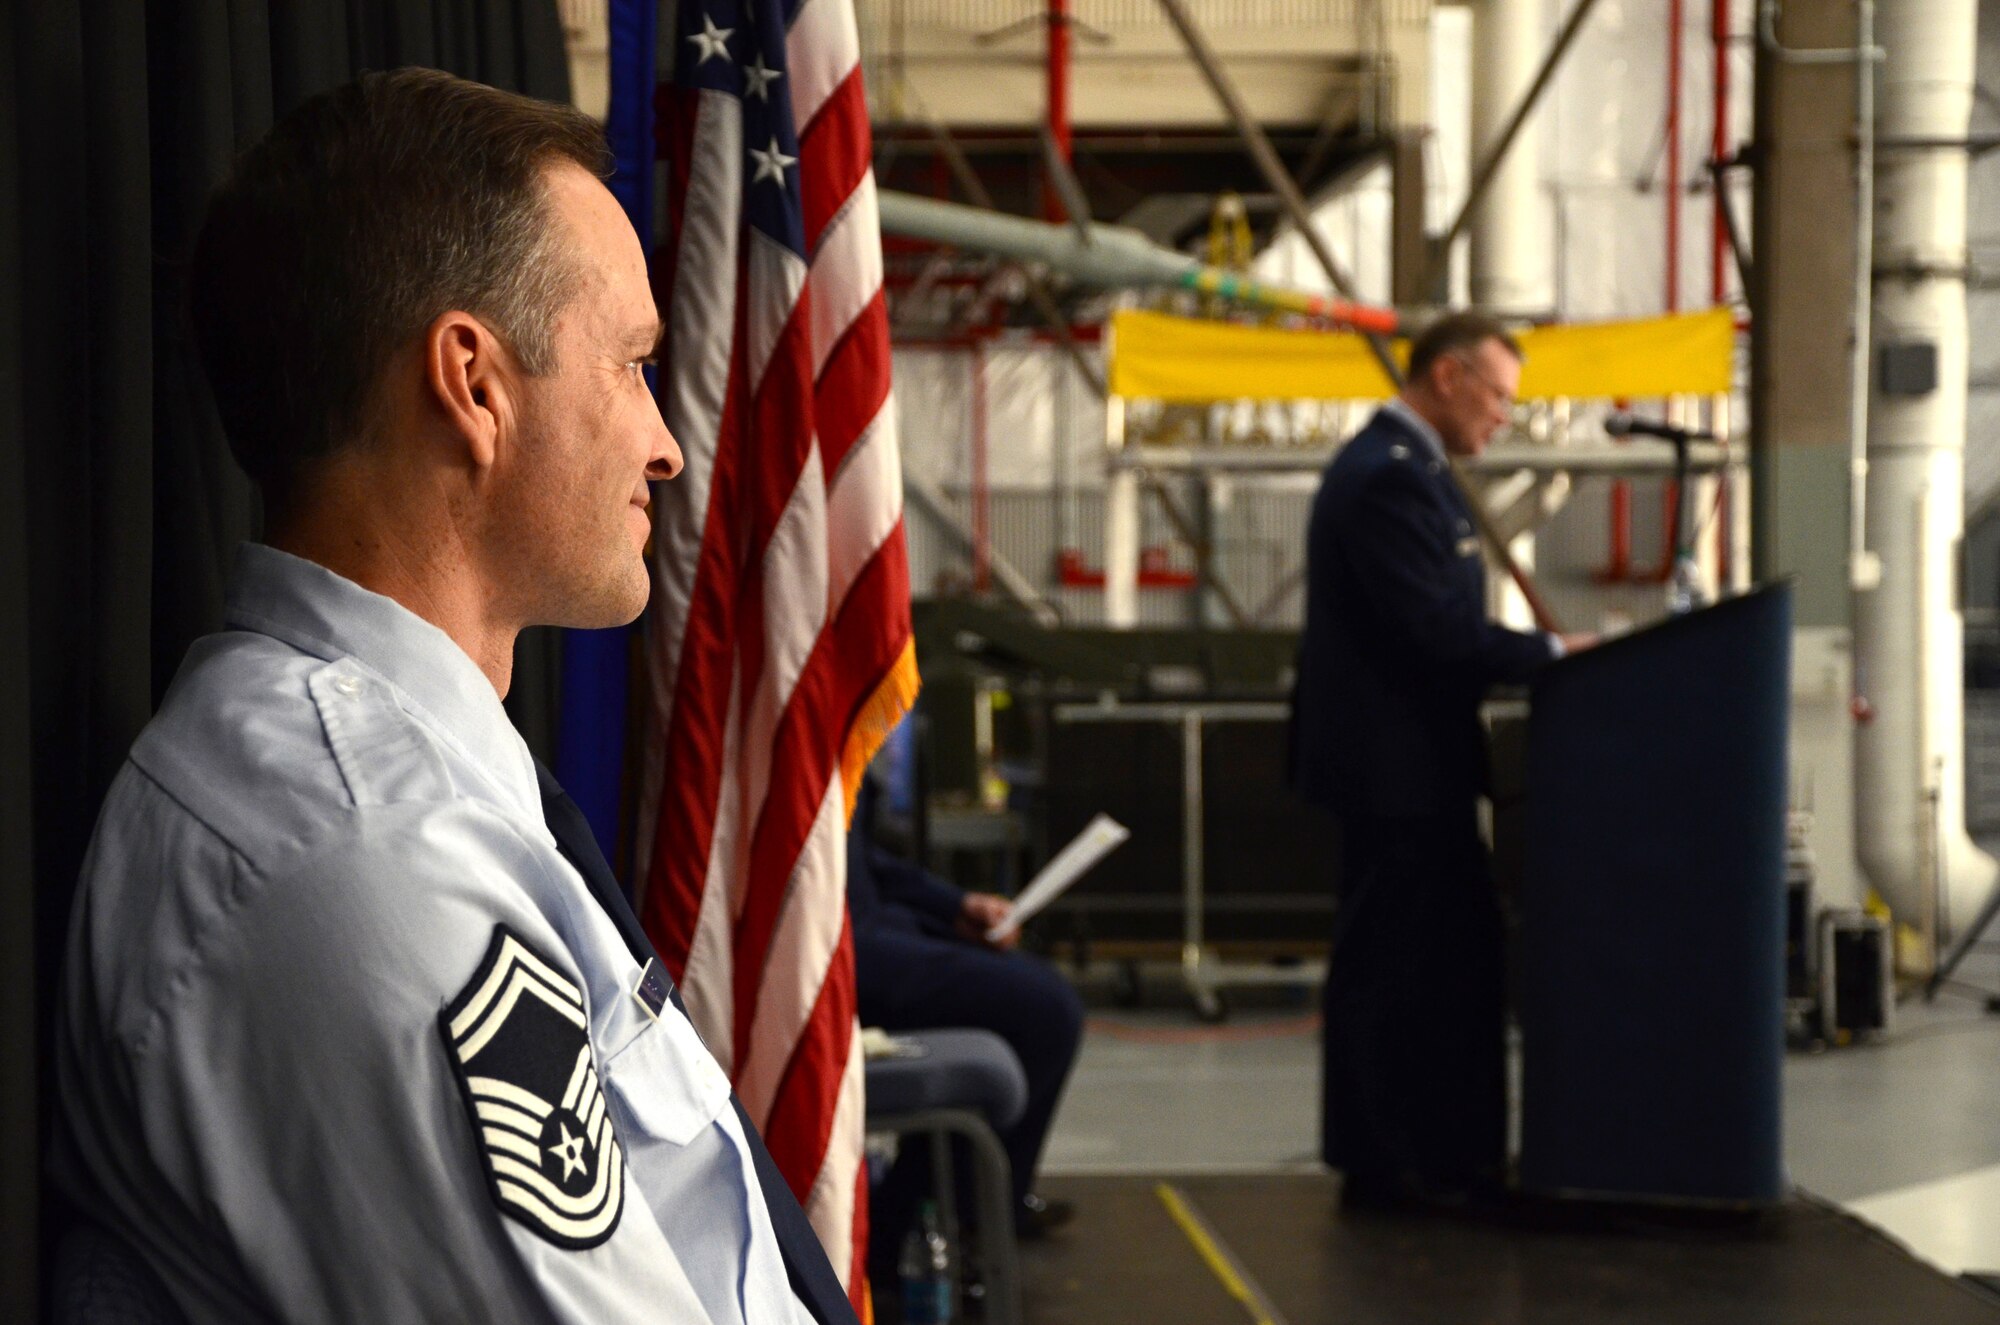 PEASE AIR NATIONAL GUARD BASE, N.H. -- Senior Master Sgt. Michael W. Juranty, 157th Maintenance Group Aircraft Maintenance superintendent, looks out over the crowd during a promotion ceremony to chief master sergeant in Hanger 254 as Lt. Col. John W. Pogorek, 157th Maintenance Group commander, speaks at the podium here March 9, 2014. Juranty is a traditional member of the maintenance group and the first to hold the enlisted position in more four years. (N.H. National Guard photo by Tech. Sgt. Mark Wyatt/RELEASED)